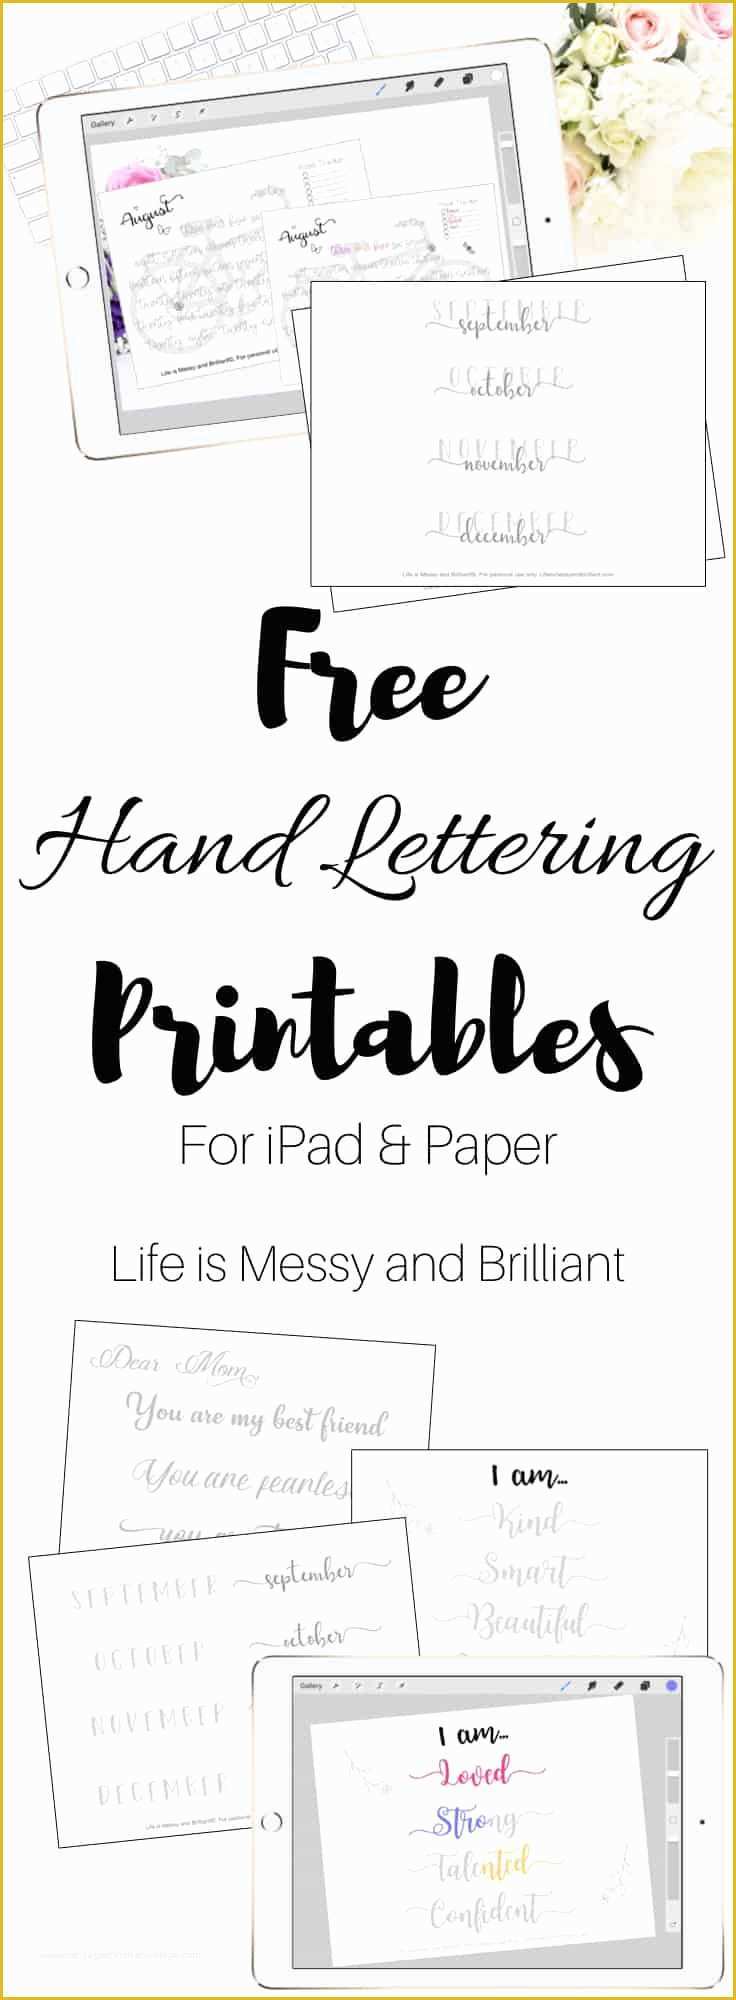 Free Procreate Templates Of Free Hand Lettering Practice Worksheets